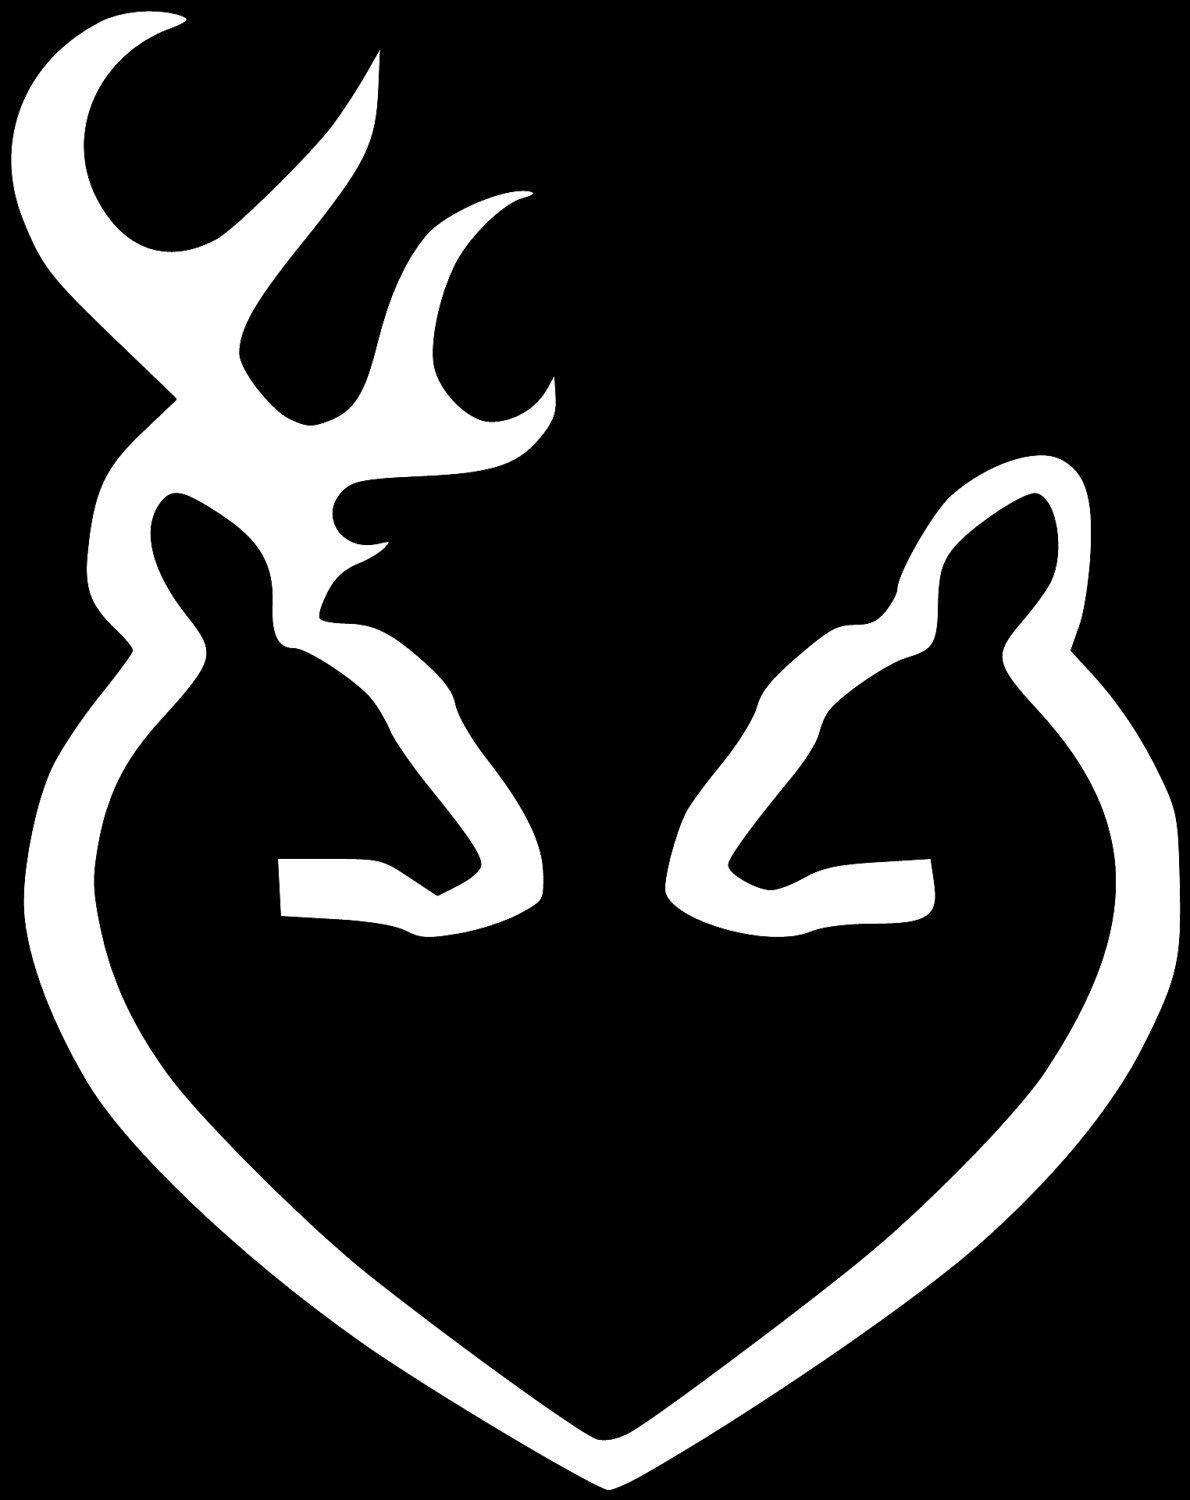 Free Browning Deer Logo Picture, Download Free Clip Art, Free Clip Art on Clipart Library